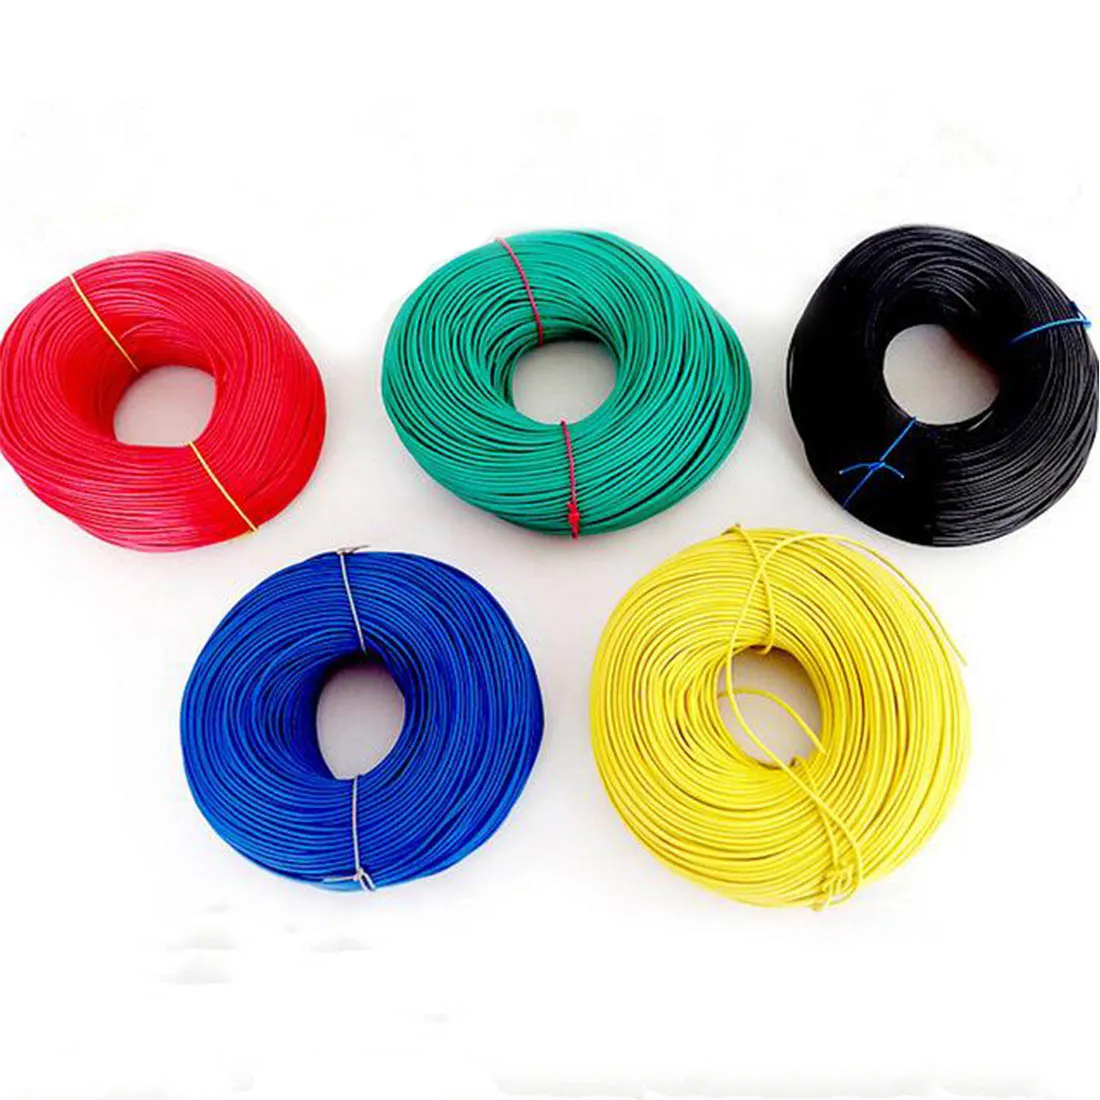 

VENSTPOW 5meters/lot 15AWG RV Wire 1.5mm Multi-strand Flexible Stranded Cord Electrical Equipment Copper Core PVC Wire DIY